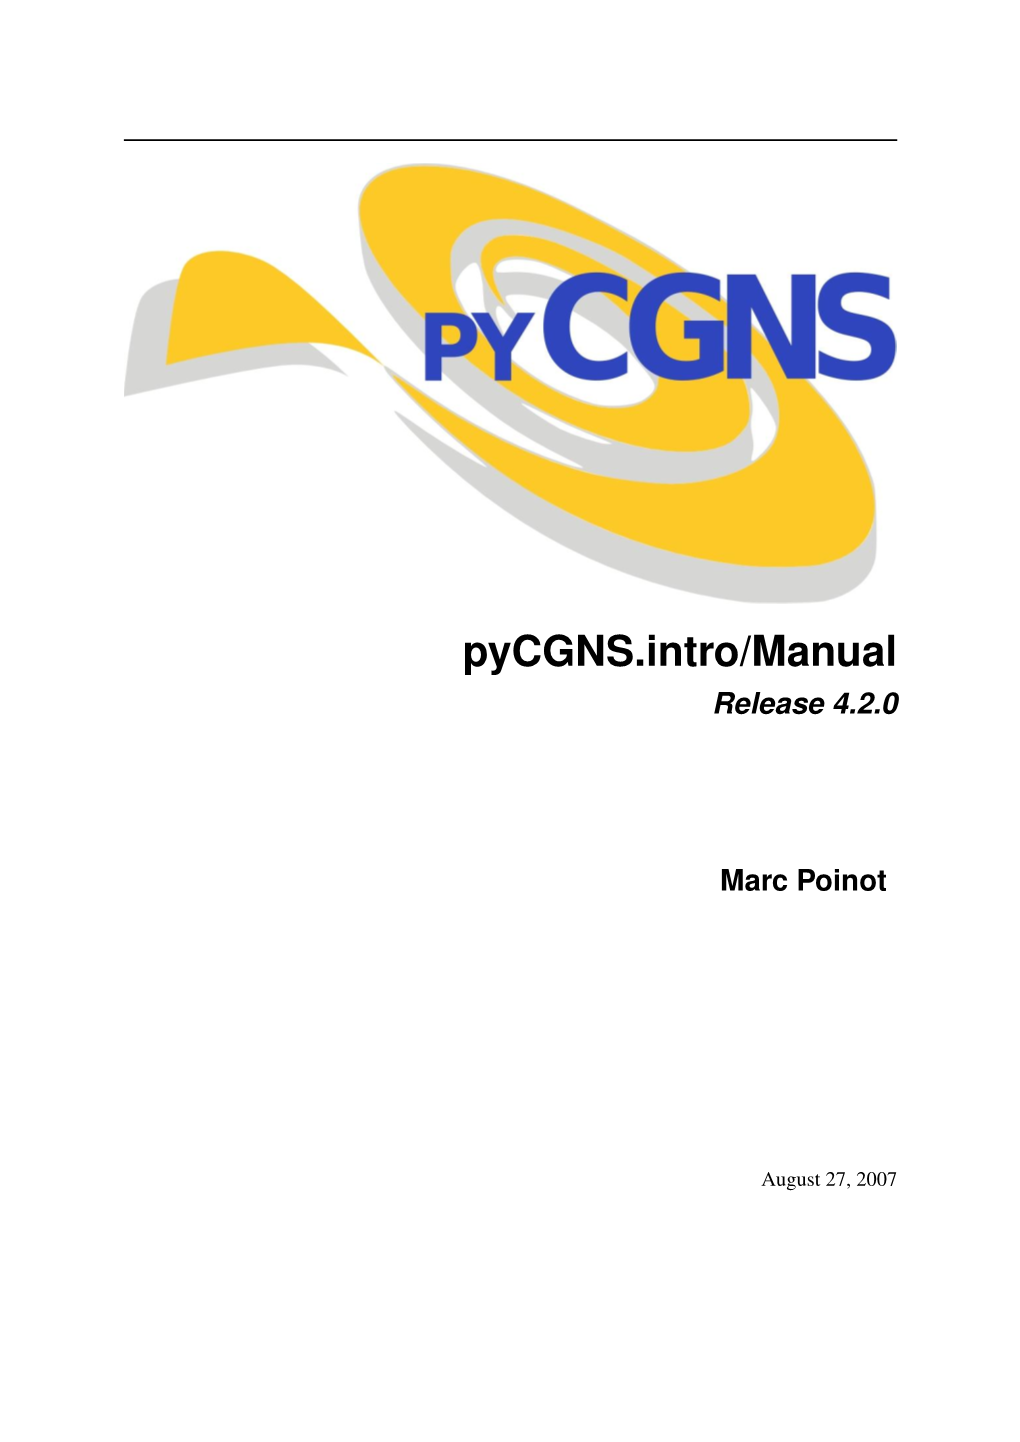 About Pycgns 3 1.1 CGNS Standard